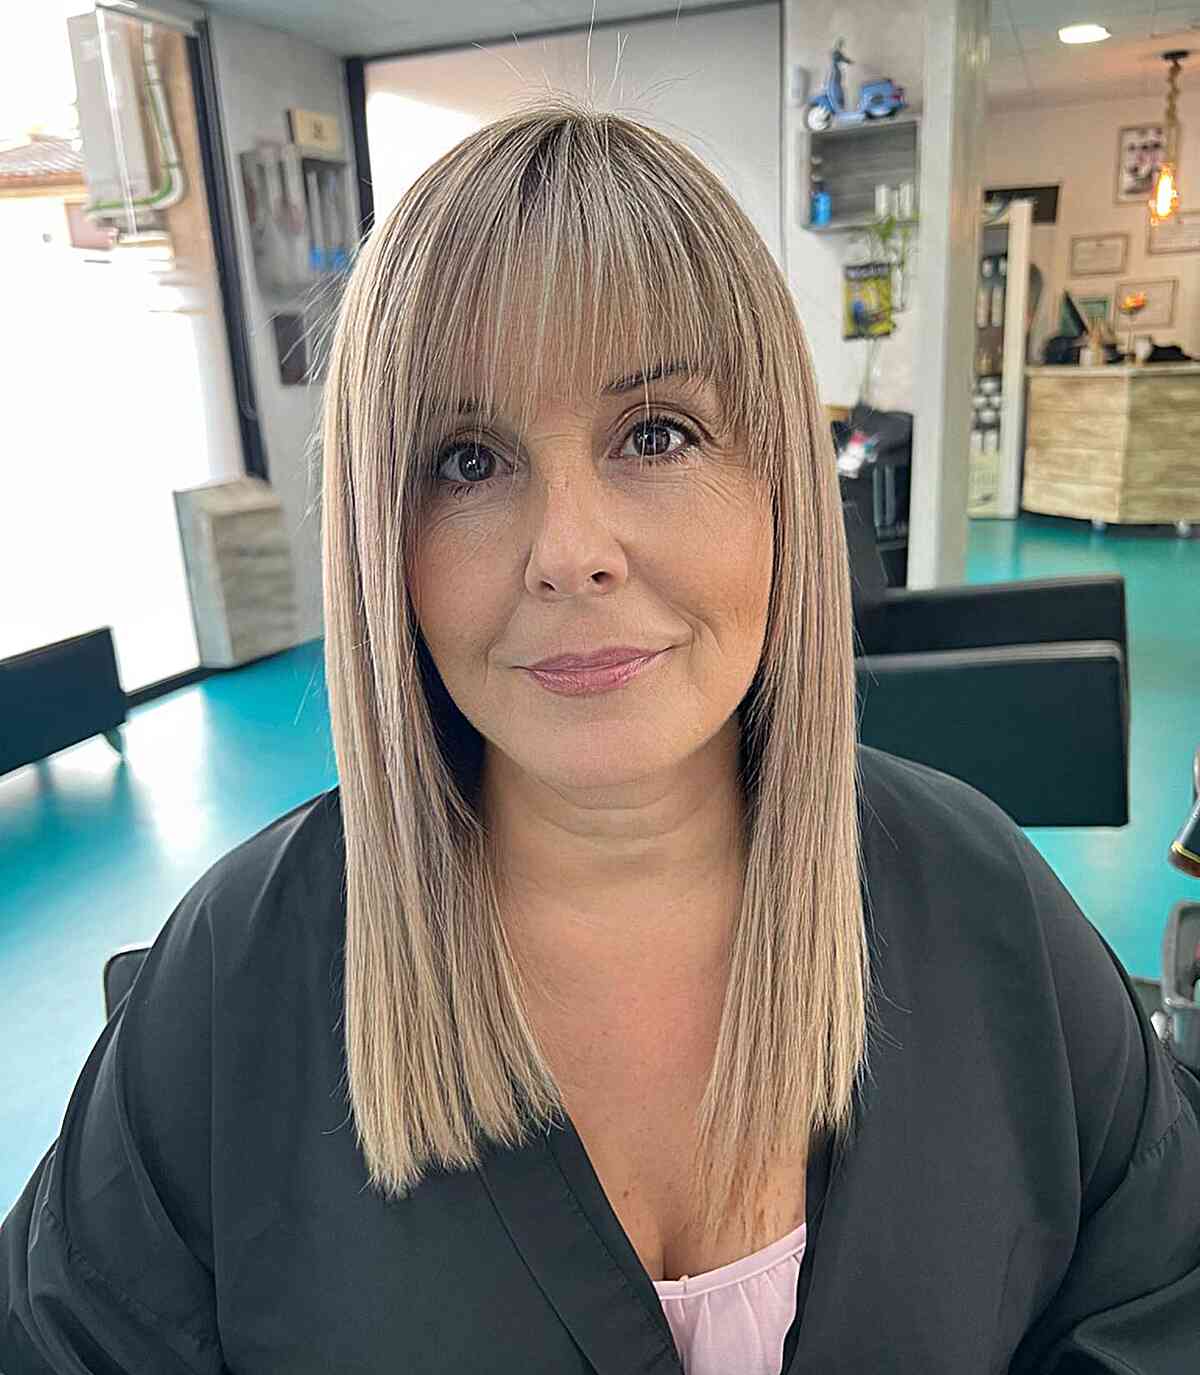 Sleek Medium Hair with See-Through Bangs for Ladies Over 50 with Finer Locks